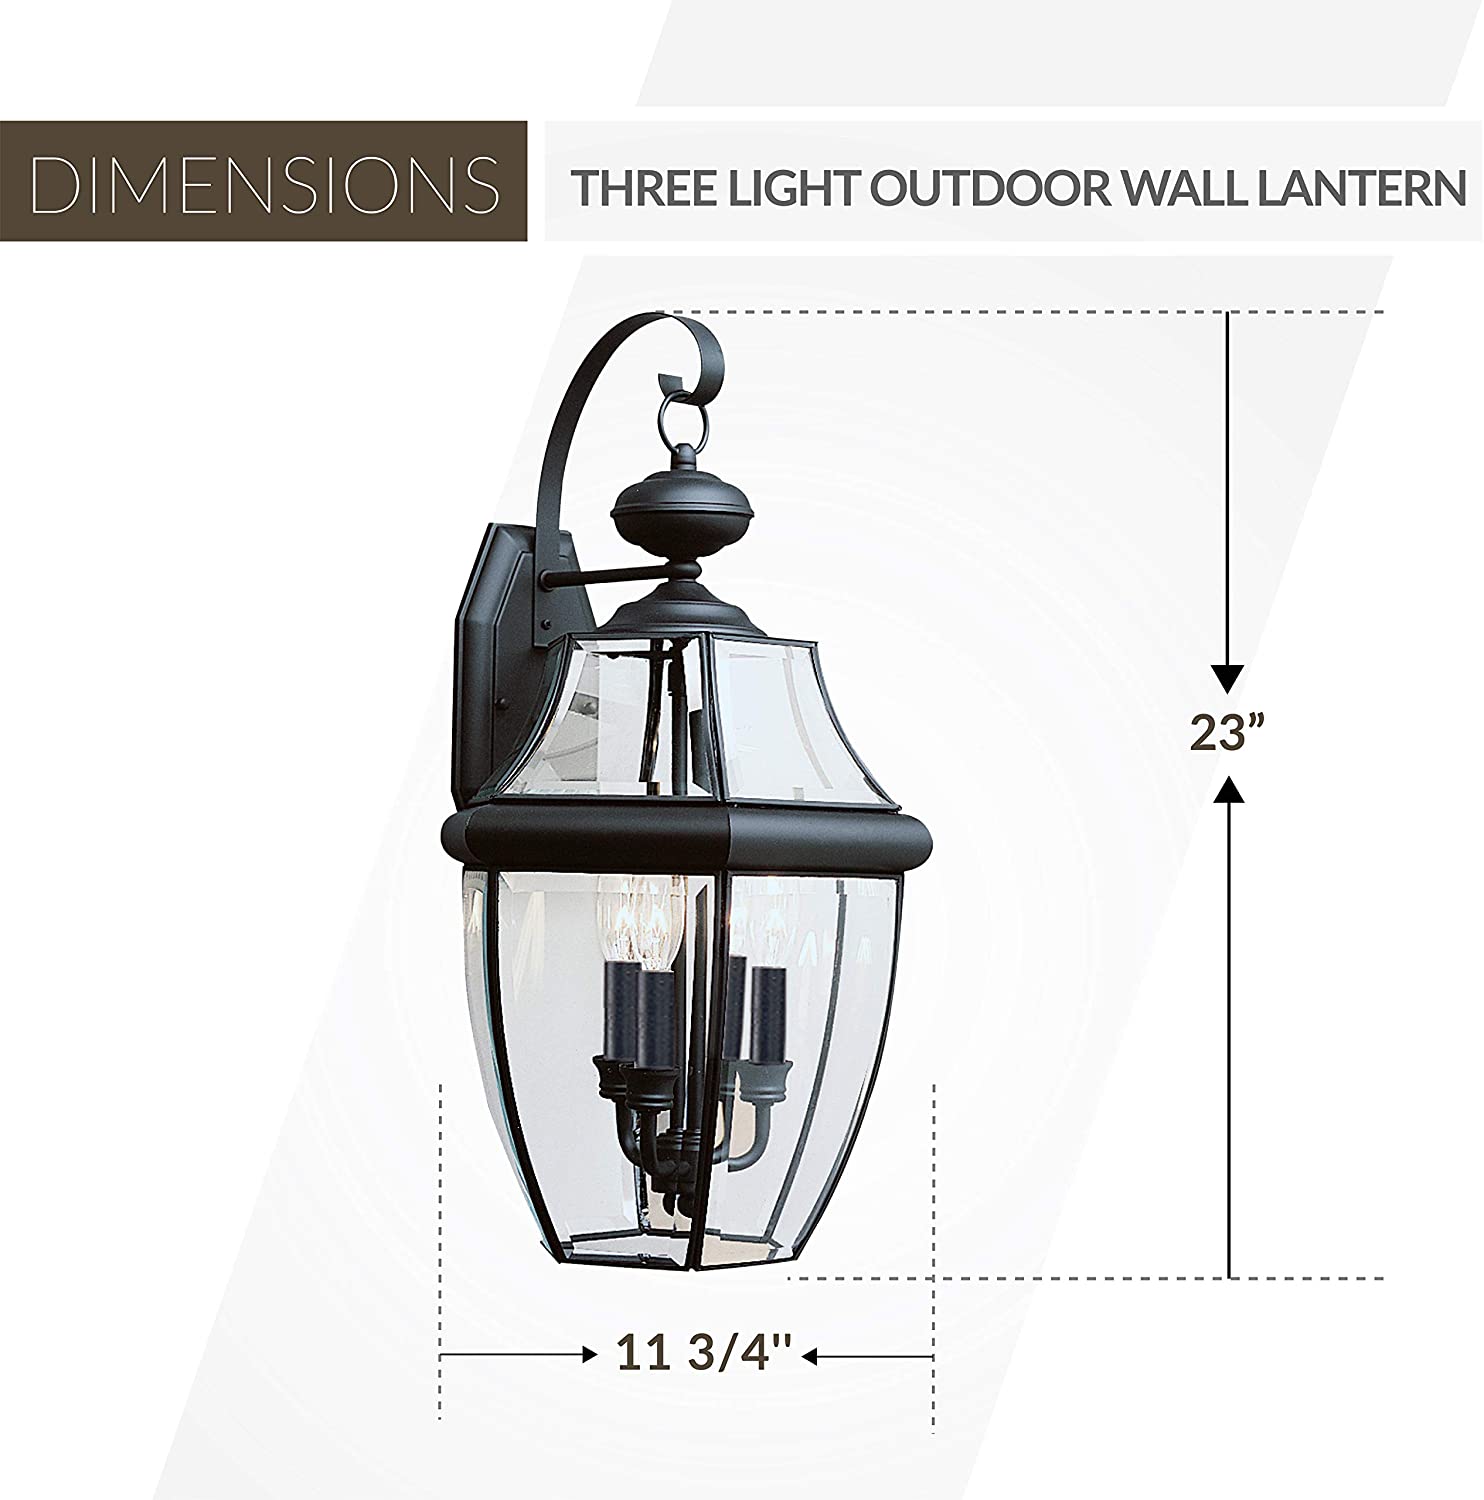 Sea Gull Lighting 8039-12 2-Light Lancaster Medium Outdoor Wall Lantern, Clear Beveled Glass and Black, Finish: Black By Visit the Sea Gull Lighting Store - image 3 of 5